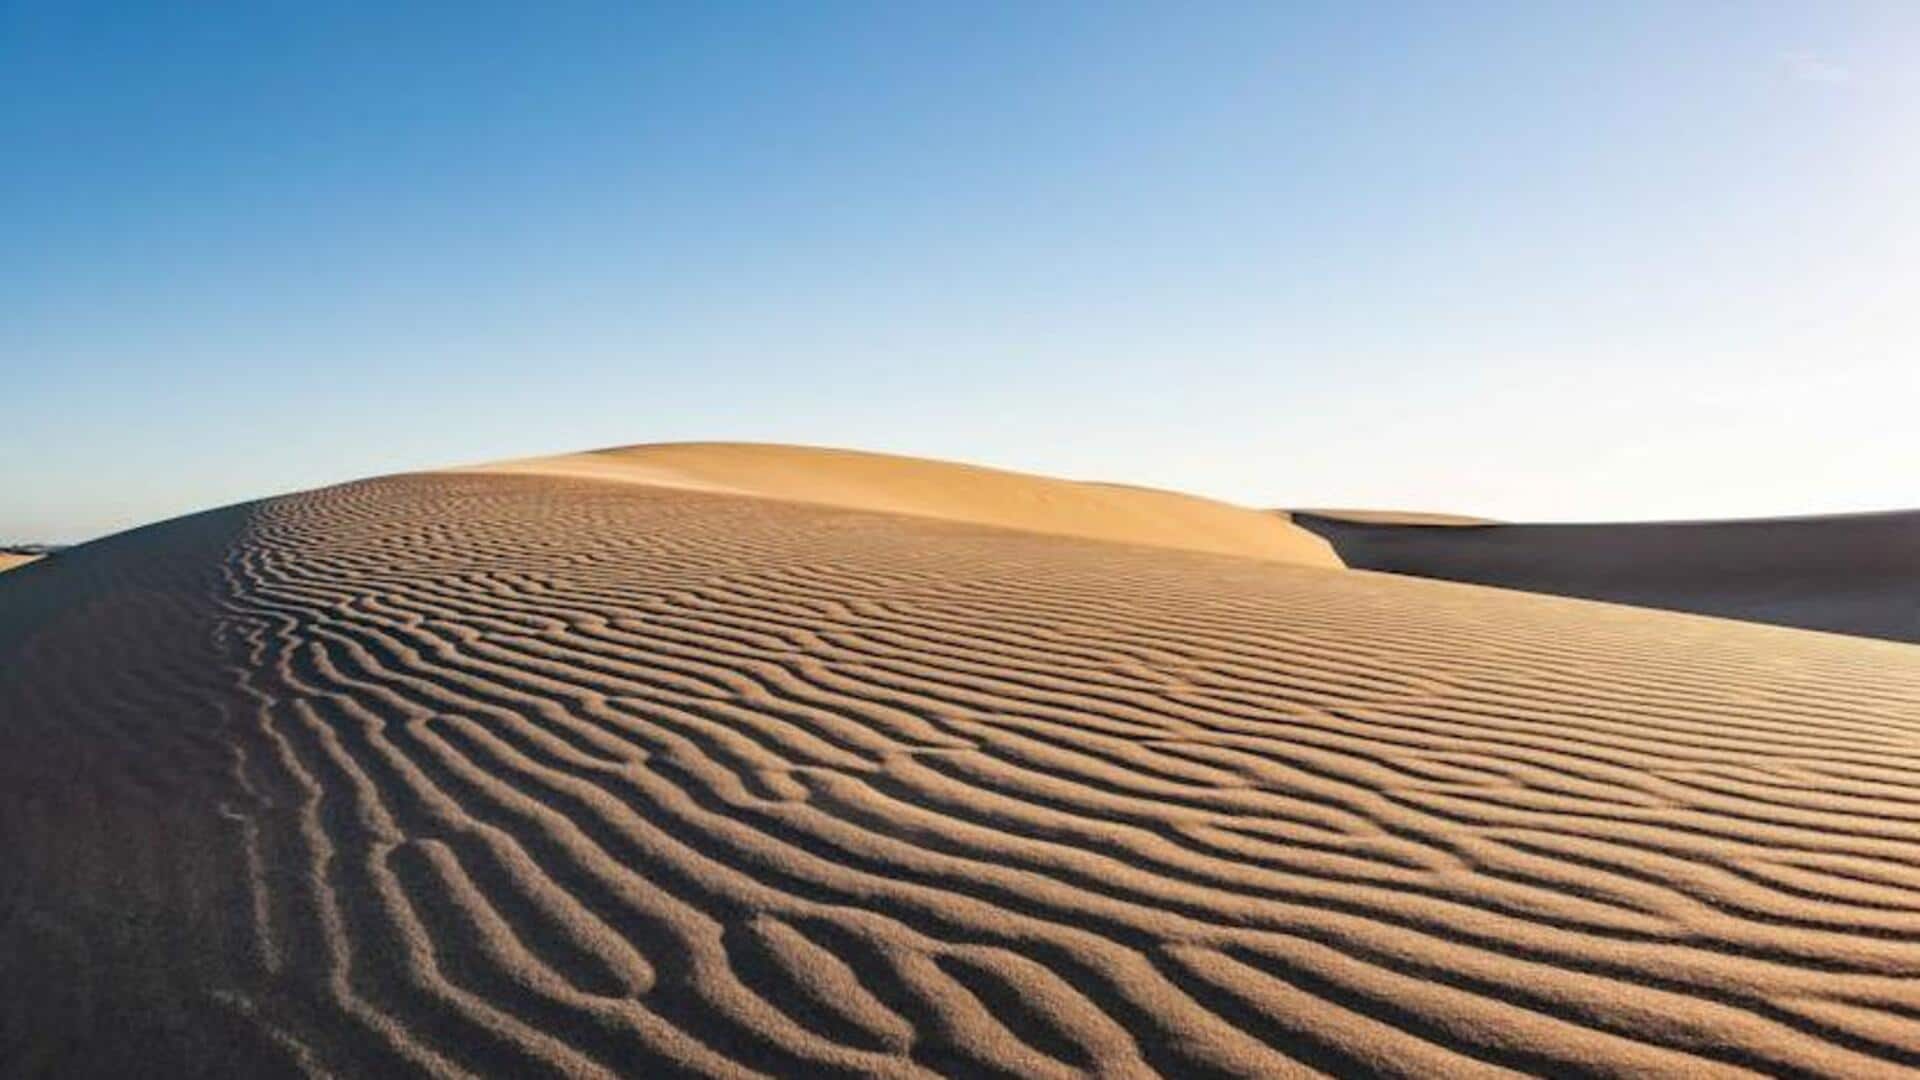 Visiting the Sahara Desert? Don't forget to pack these things